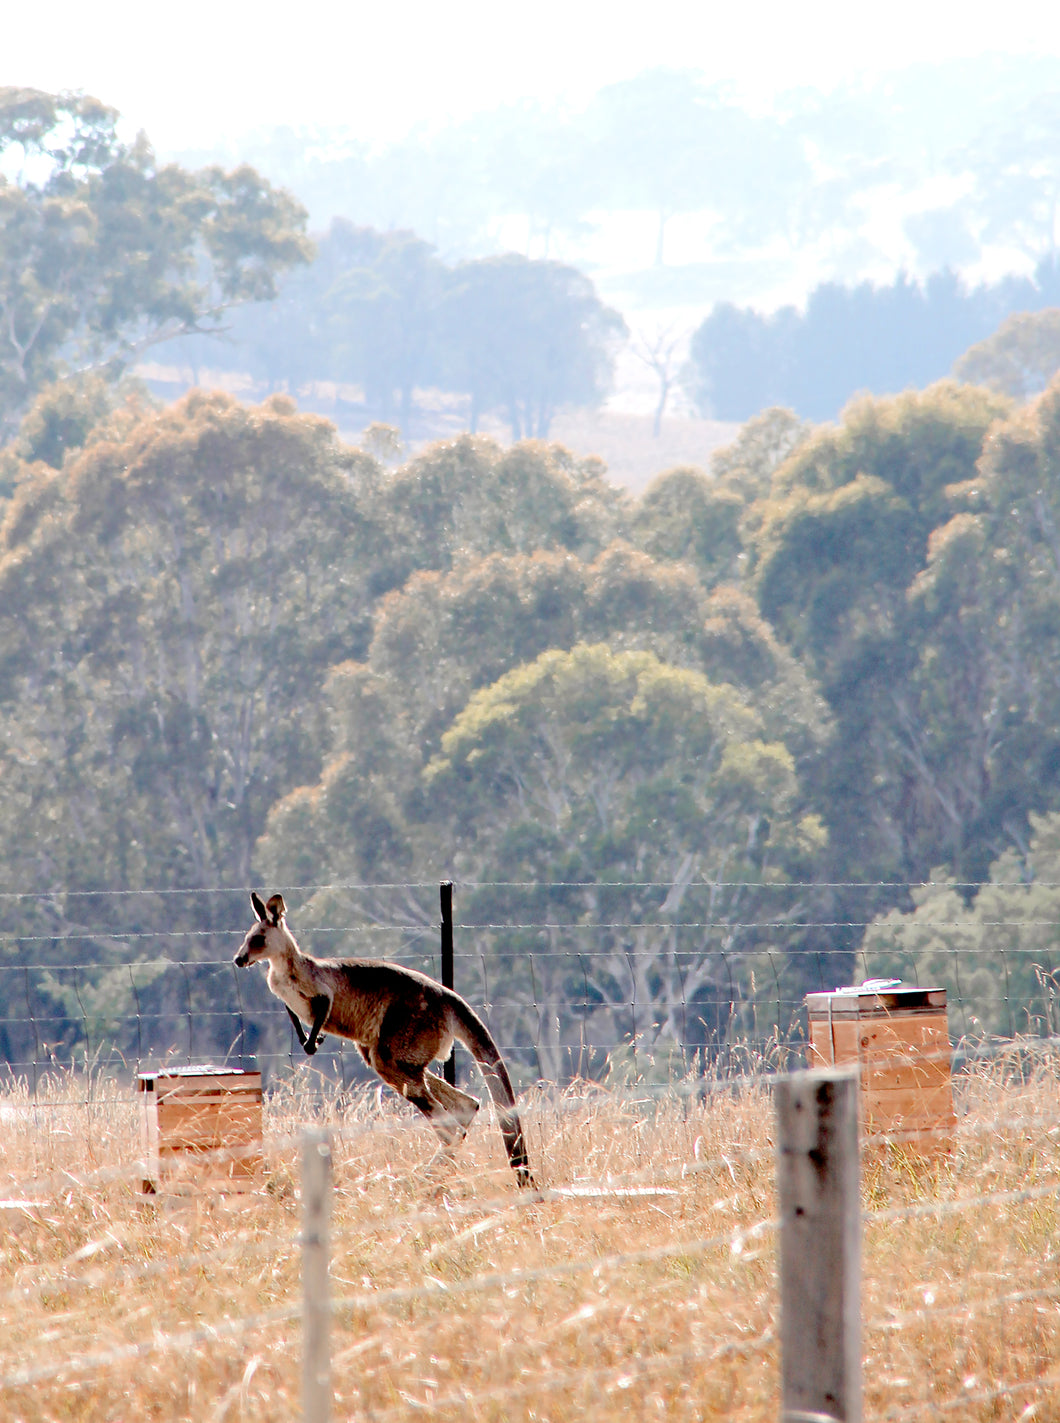 Malfroy's Gold Kangaroo in the apiary